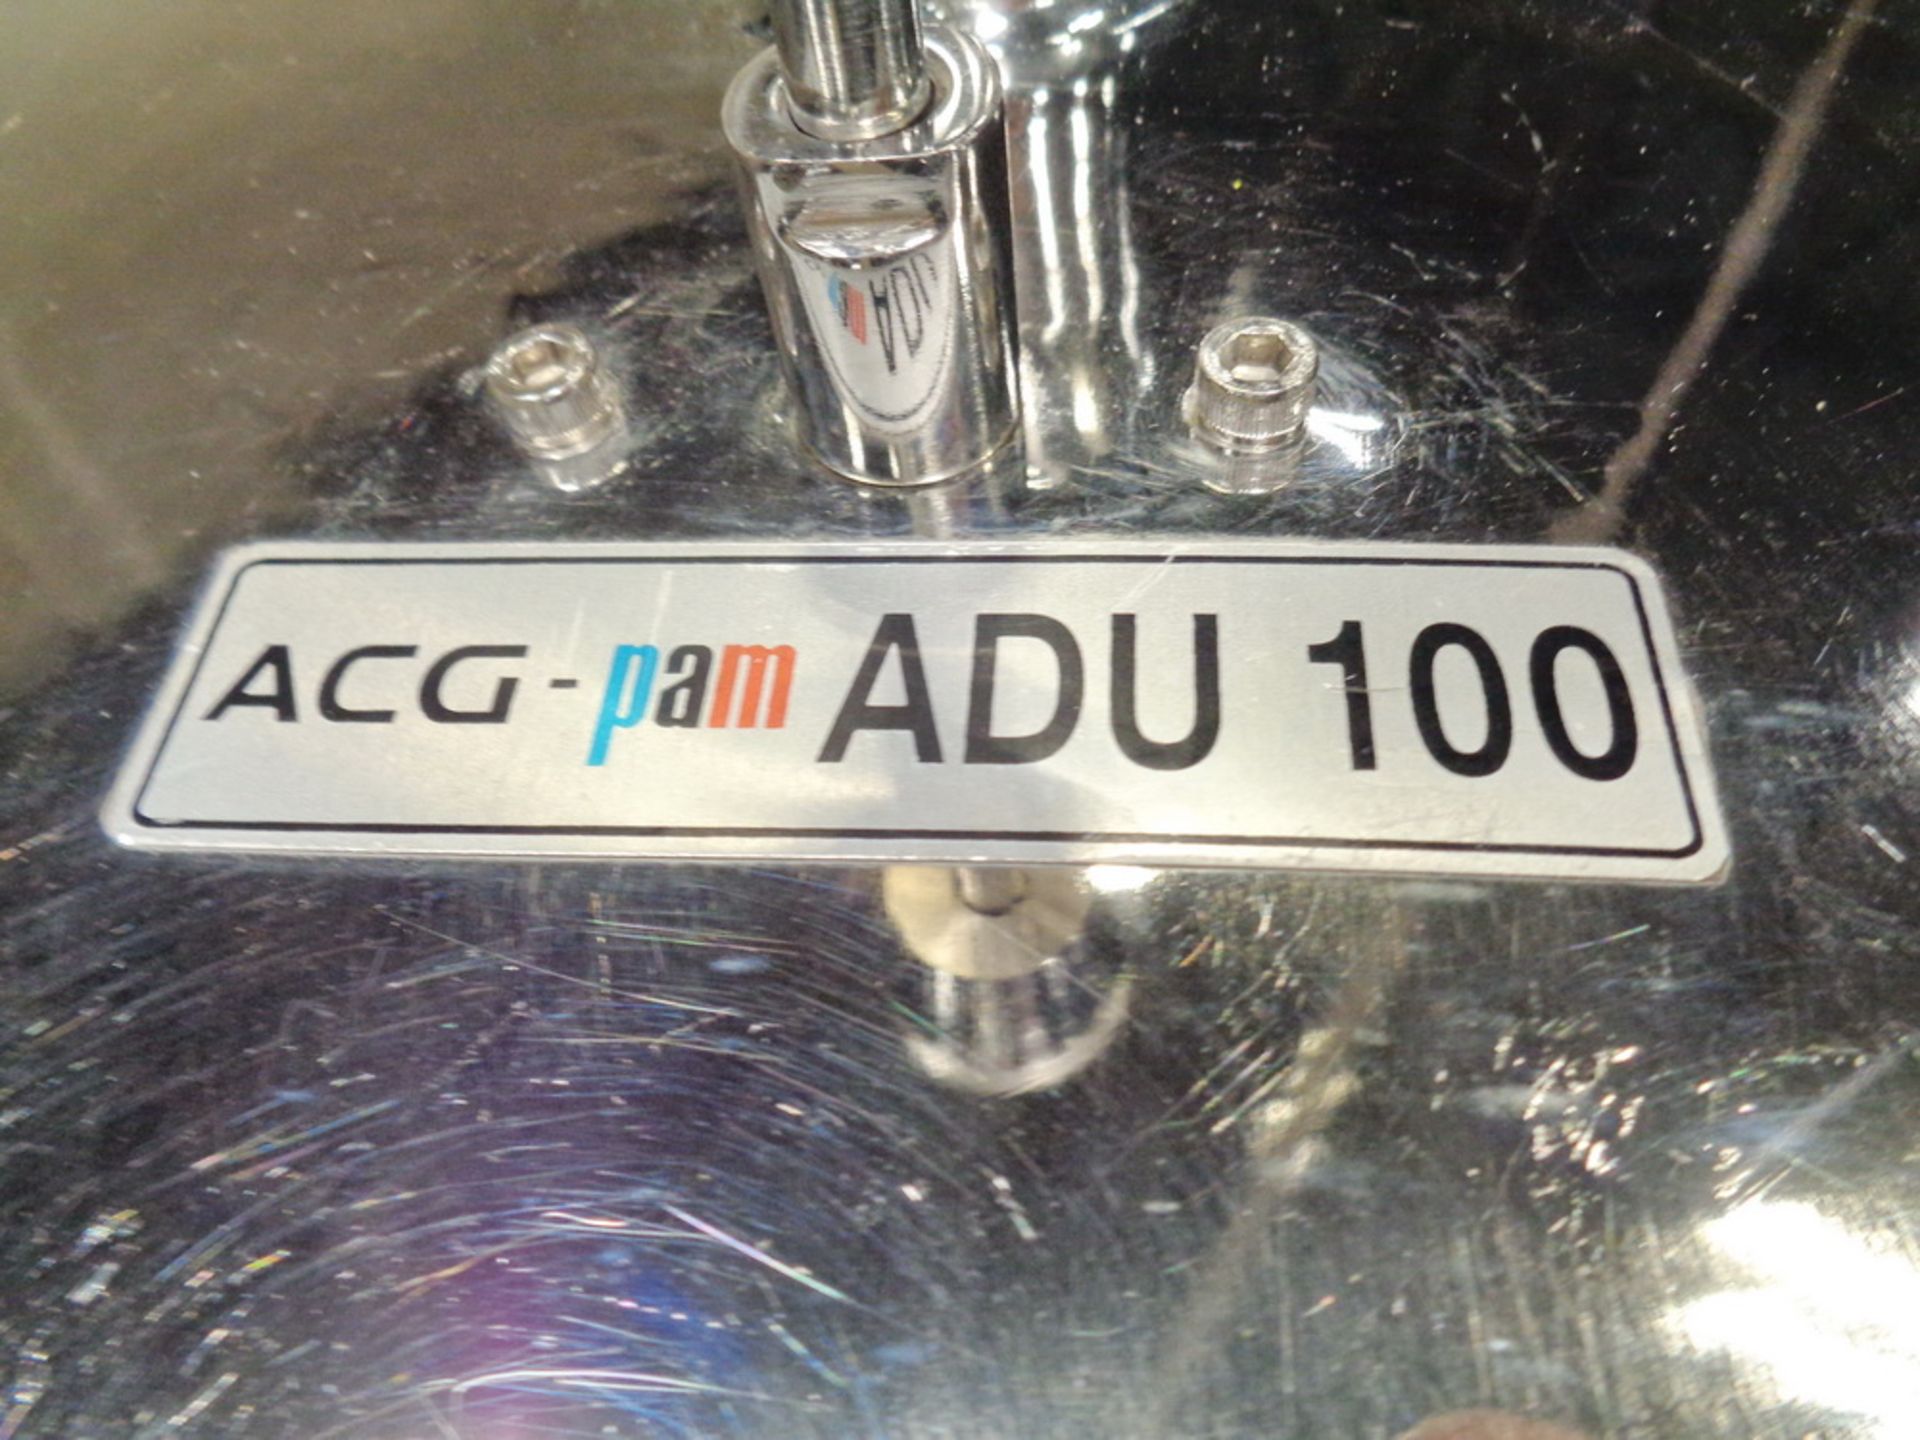 ACG PAM Portable SS Dust Extraction Vacuum, Model ADU-100 - Image 4 of 6